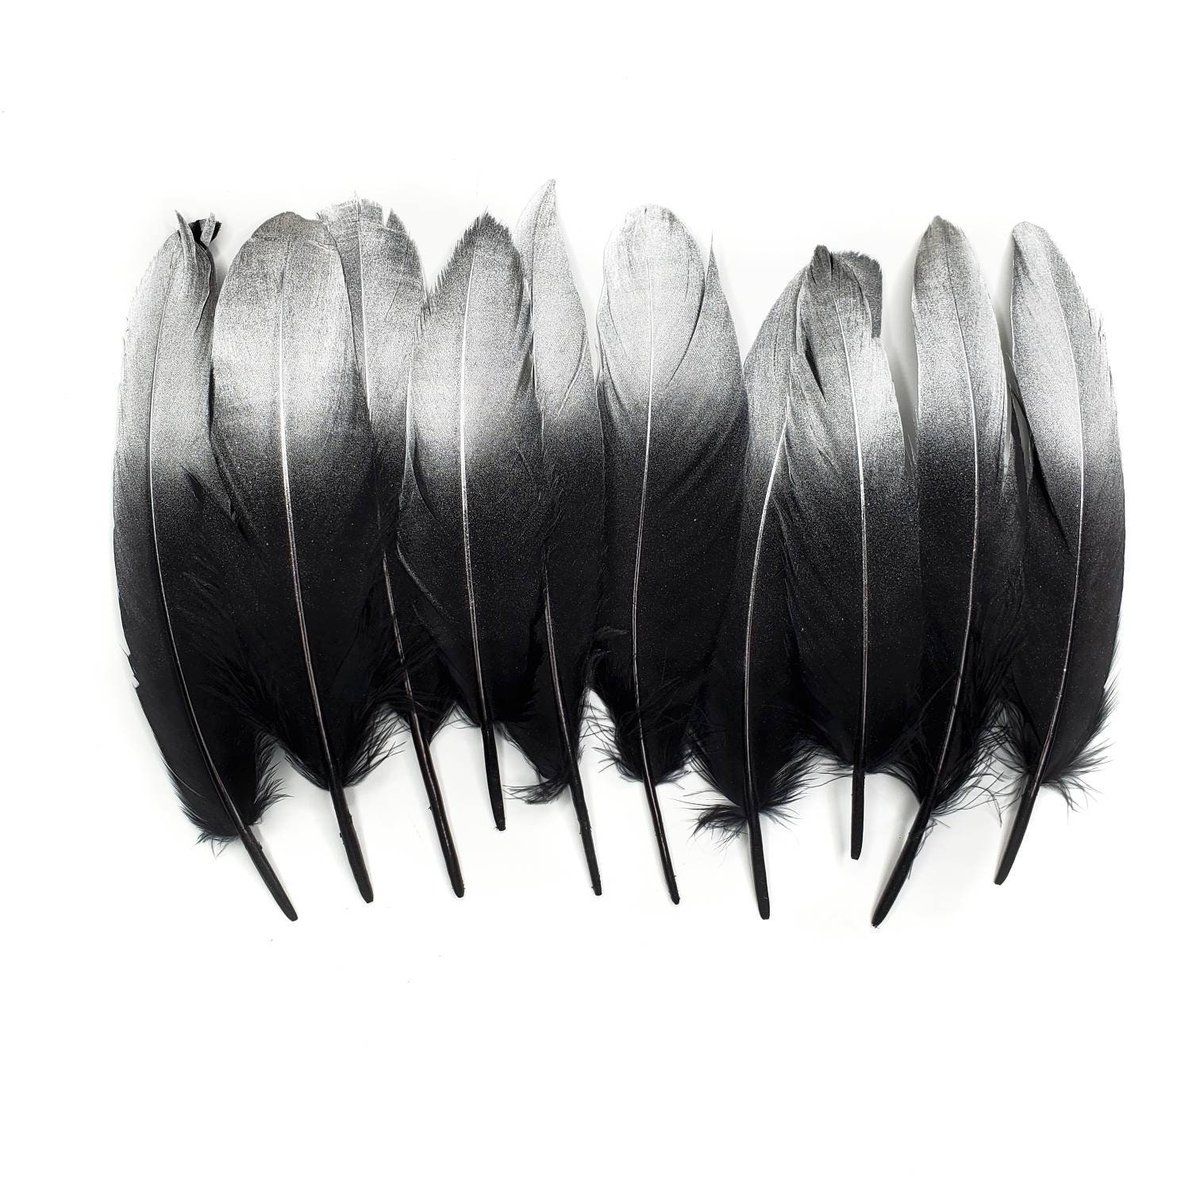 Black Ostrich Feathers, 10 Pieces, 6-8 Inches, Fall Halloween